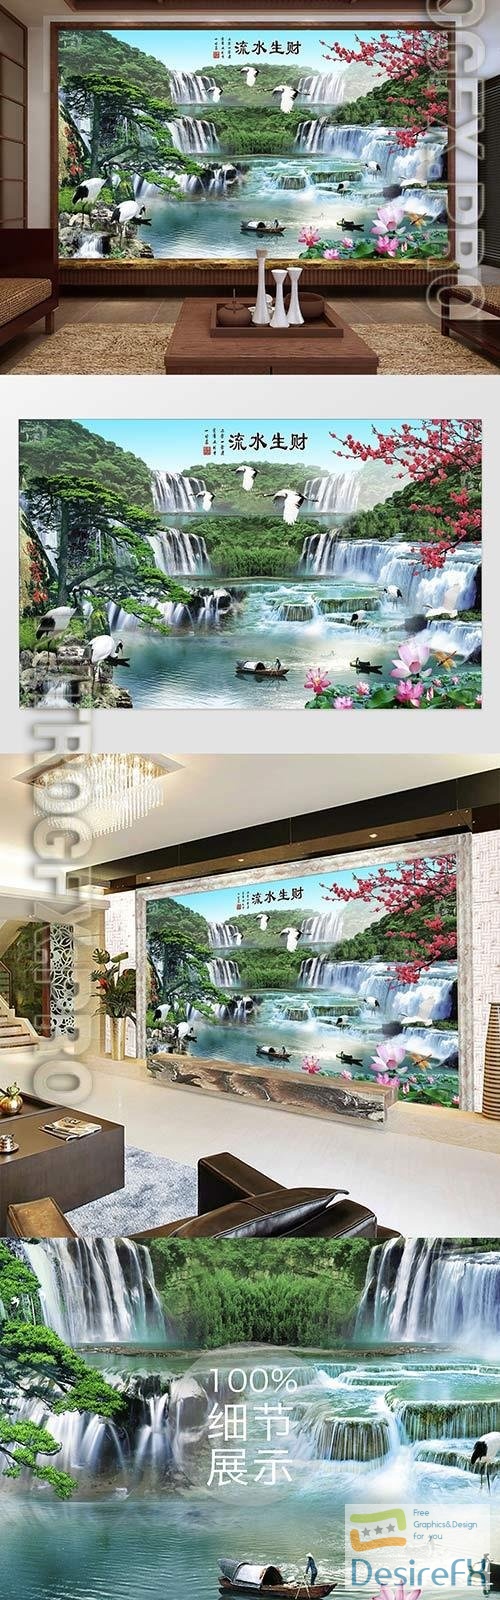 Beautiful freehand scenery landscape water and wealth tv background wall